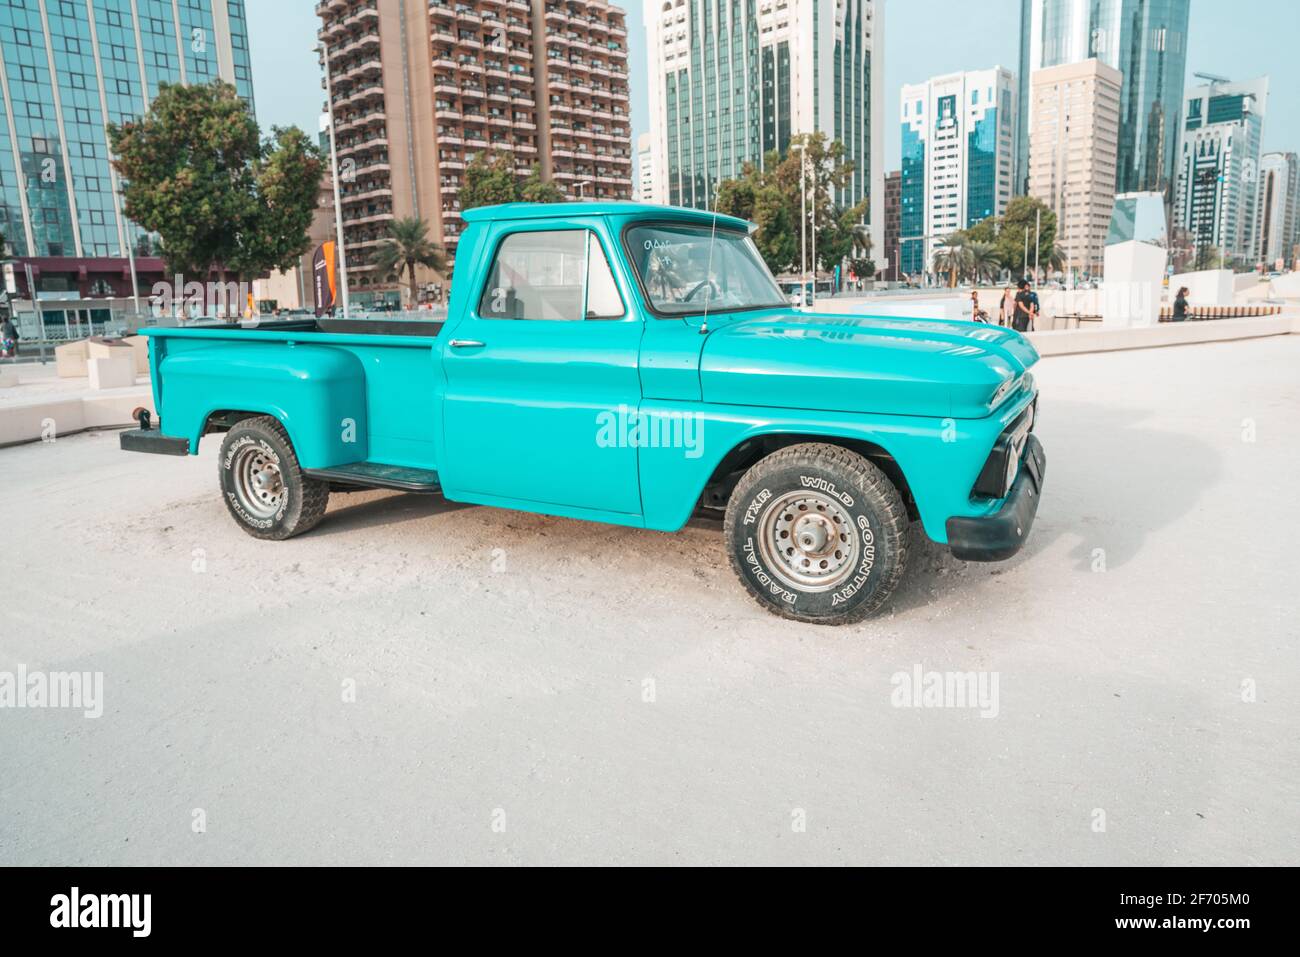 Classic Chevrolet pickup truck automobile displayed in Abu Dhabi, UAE |  American sports car | vintage style and design Stock Photo